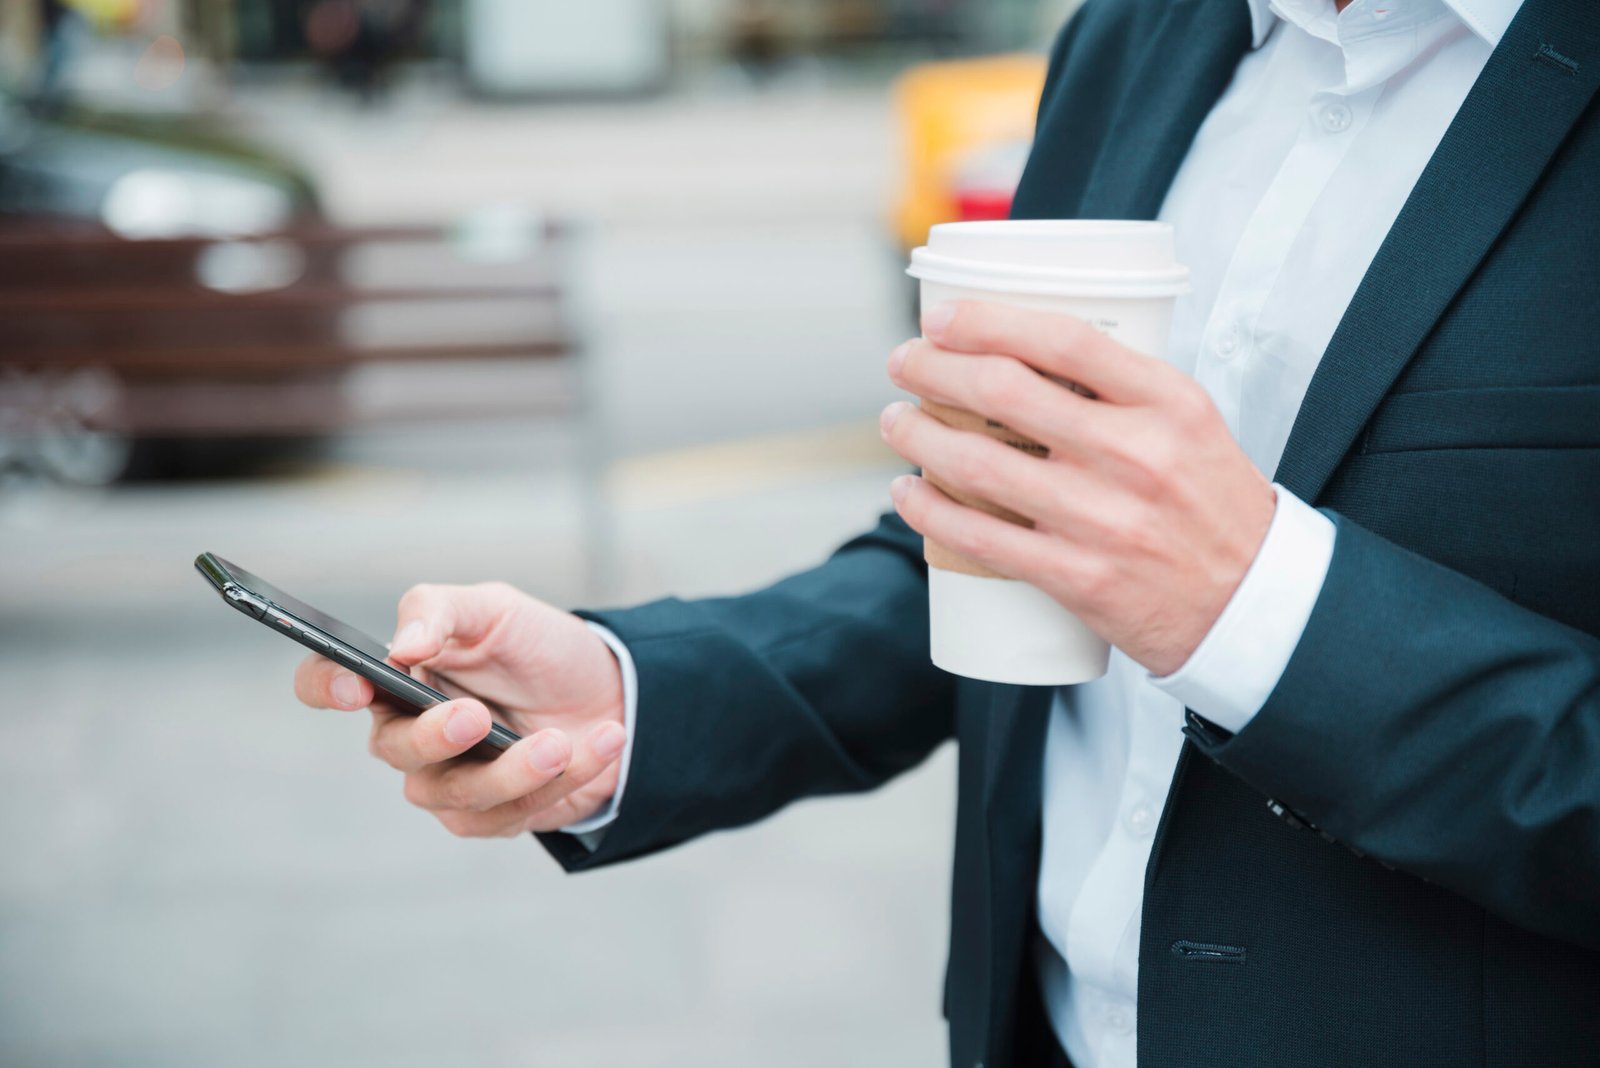 close-up-businessman-s-hand-holding-takeaway-coffee-cup-using-mobile-phone